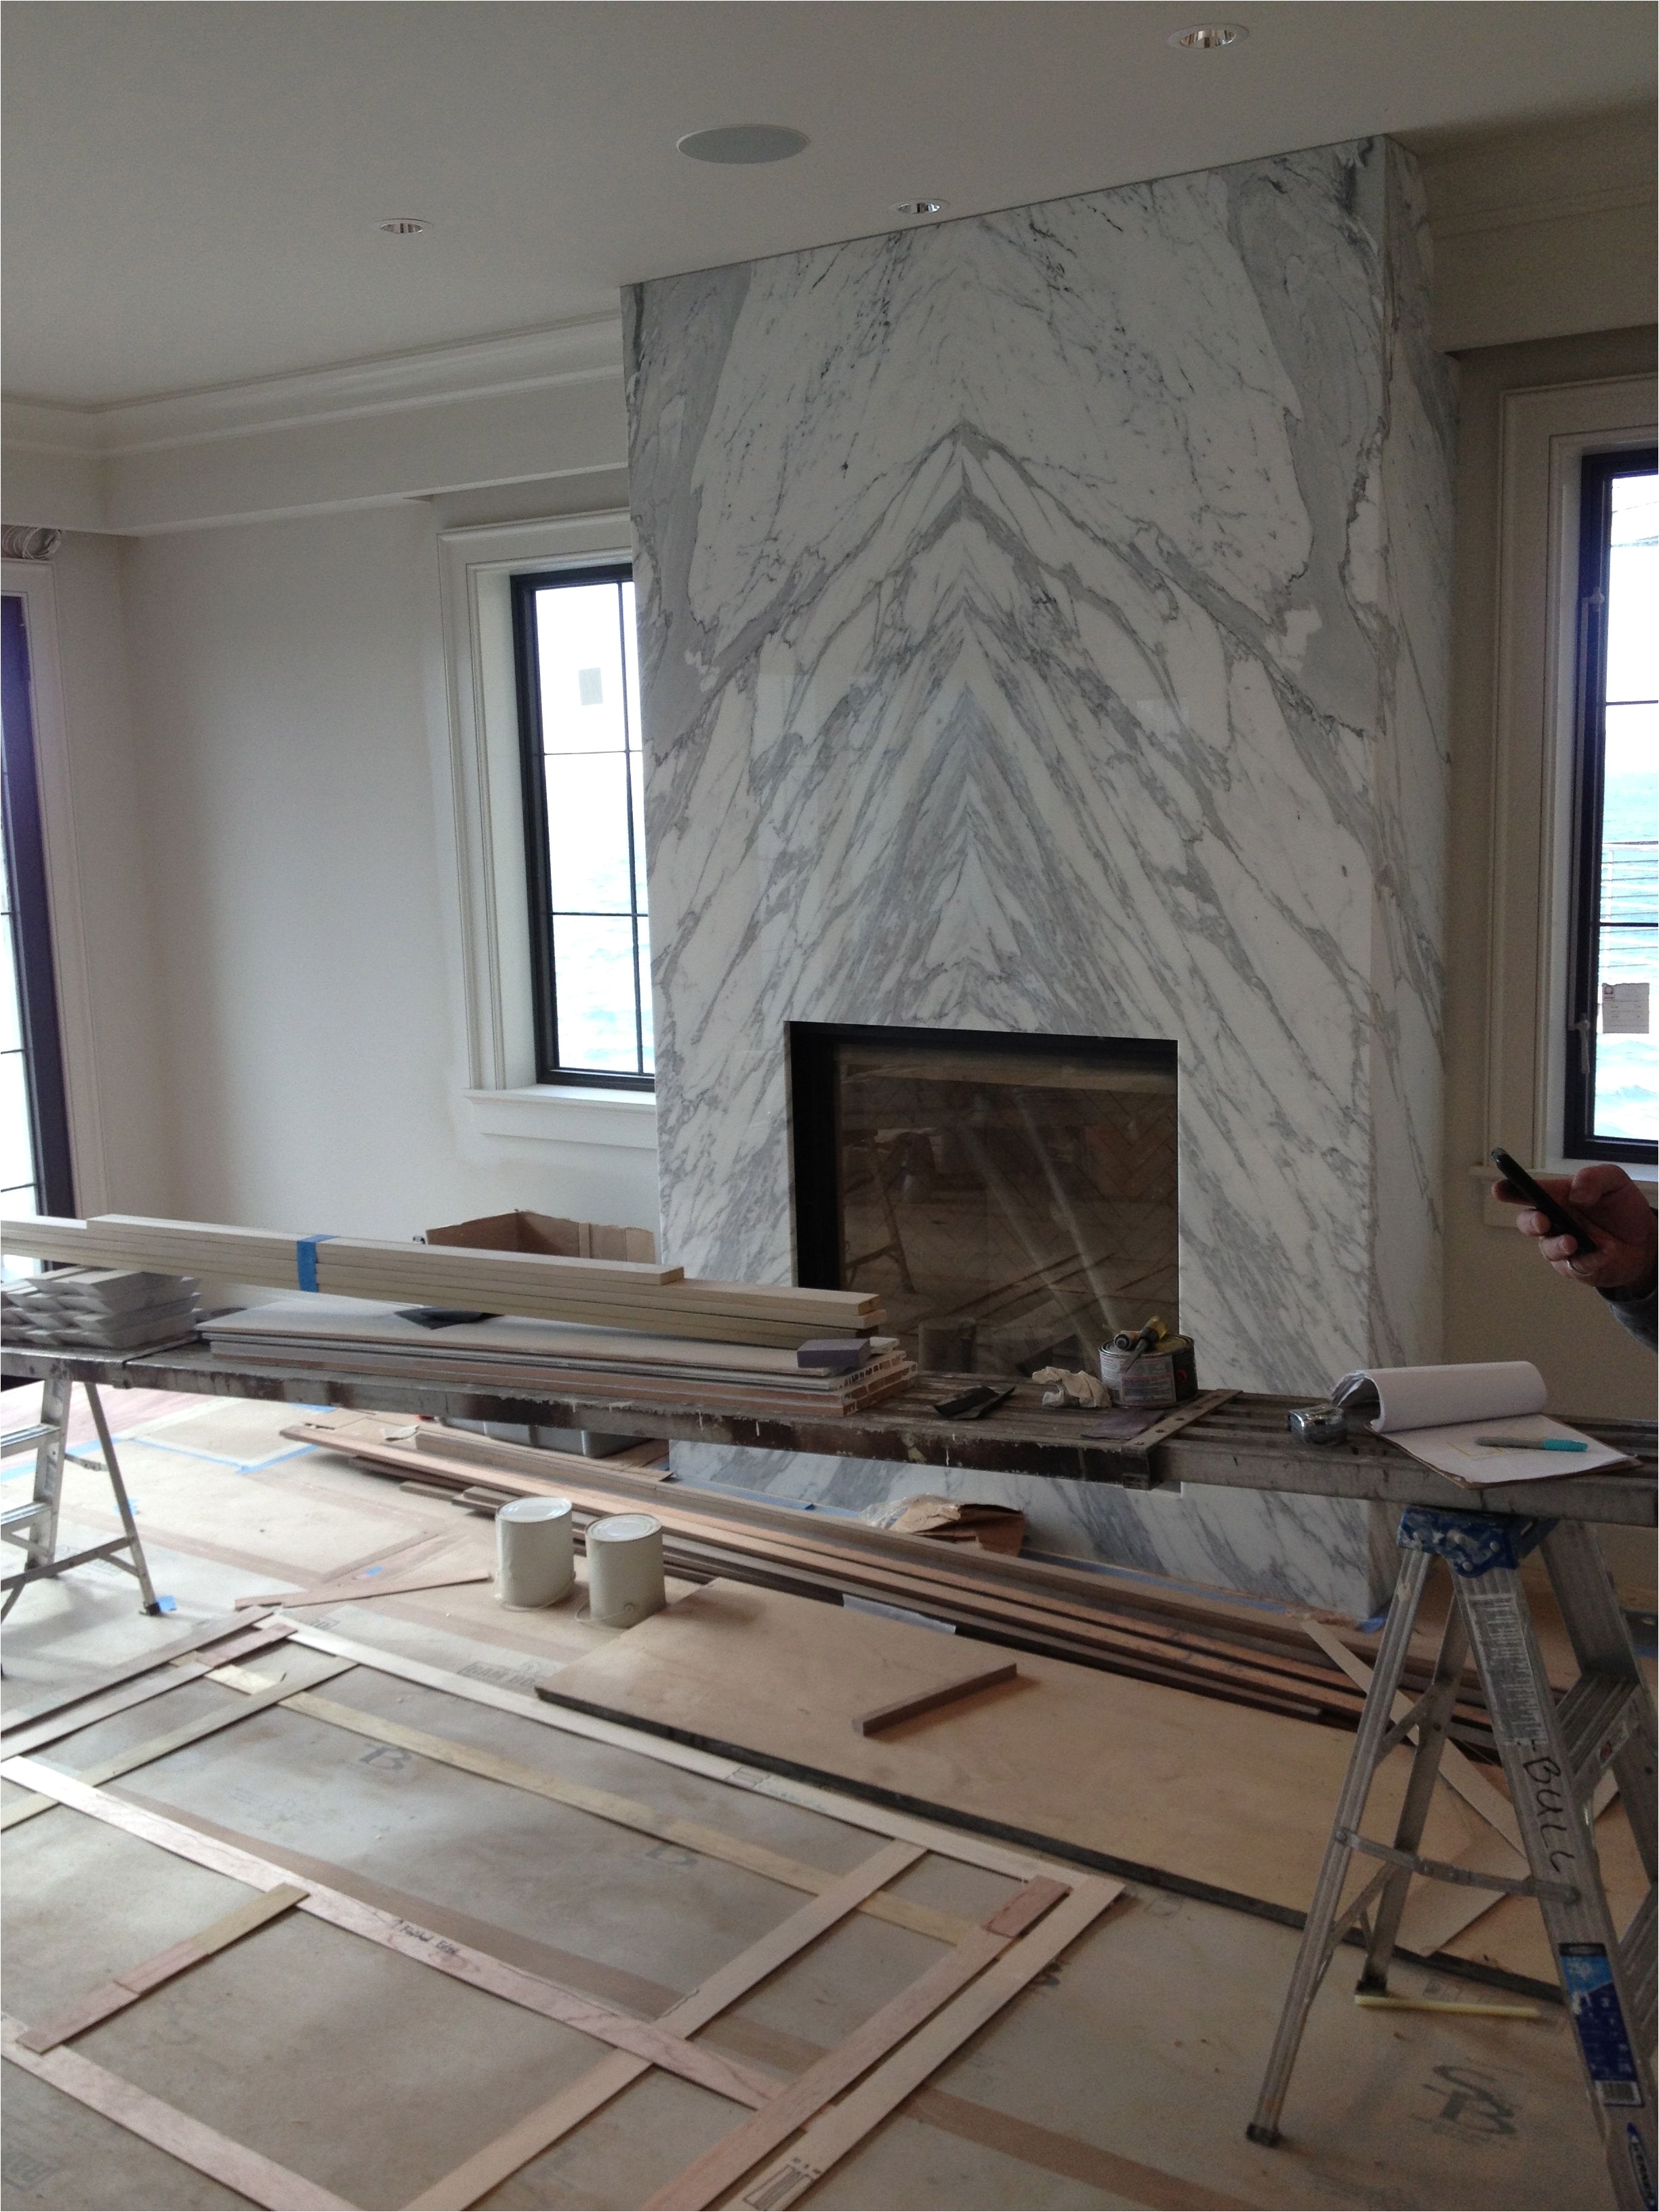 Contemporary Fireplace Mantel Fresh How to Build A Gas Fireplace Mantel Contemporary Slab Stone